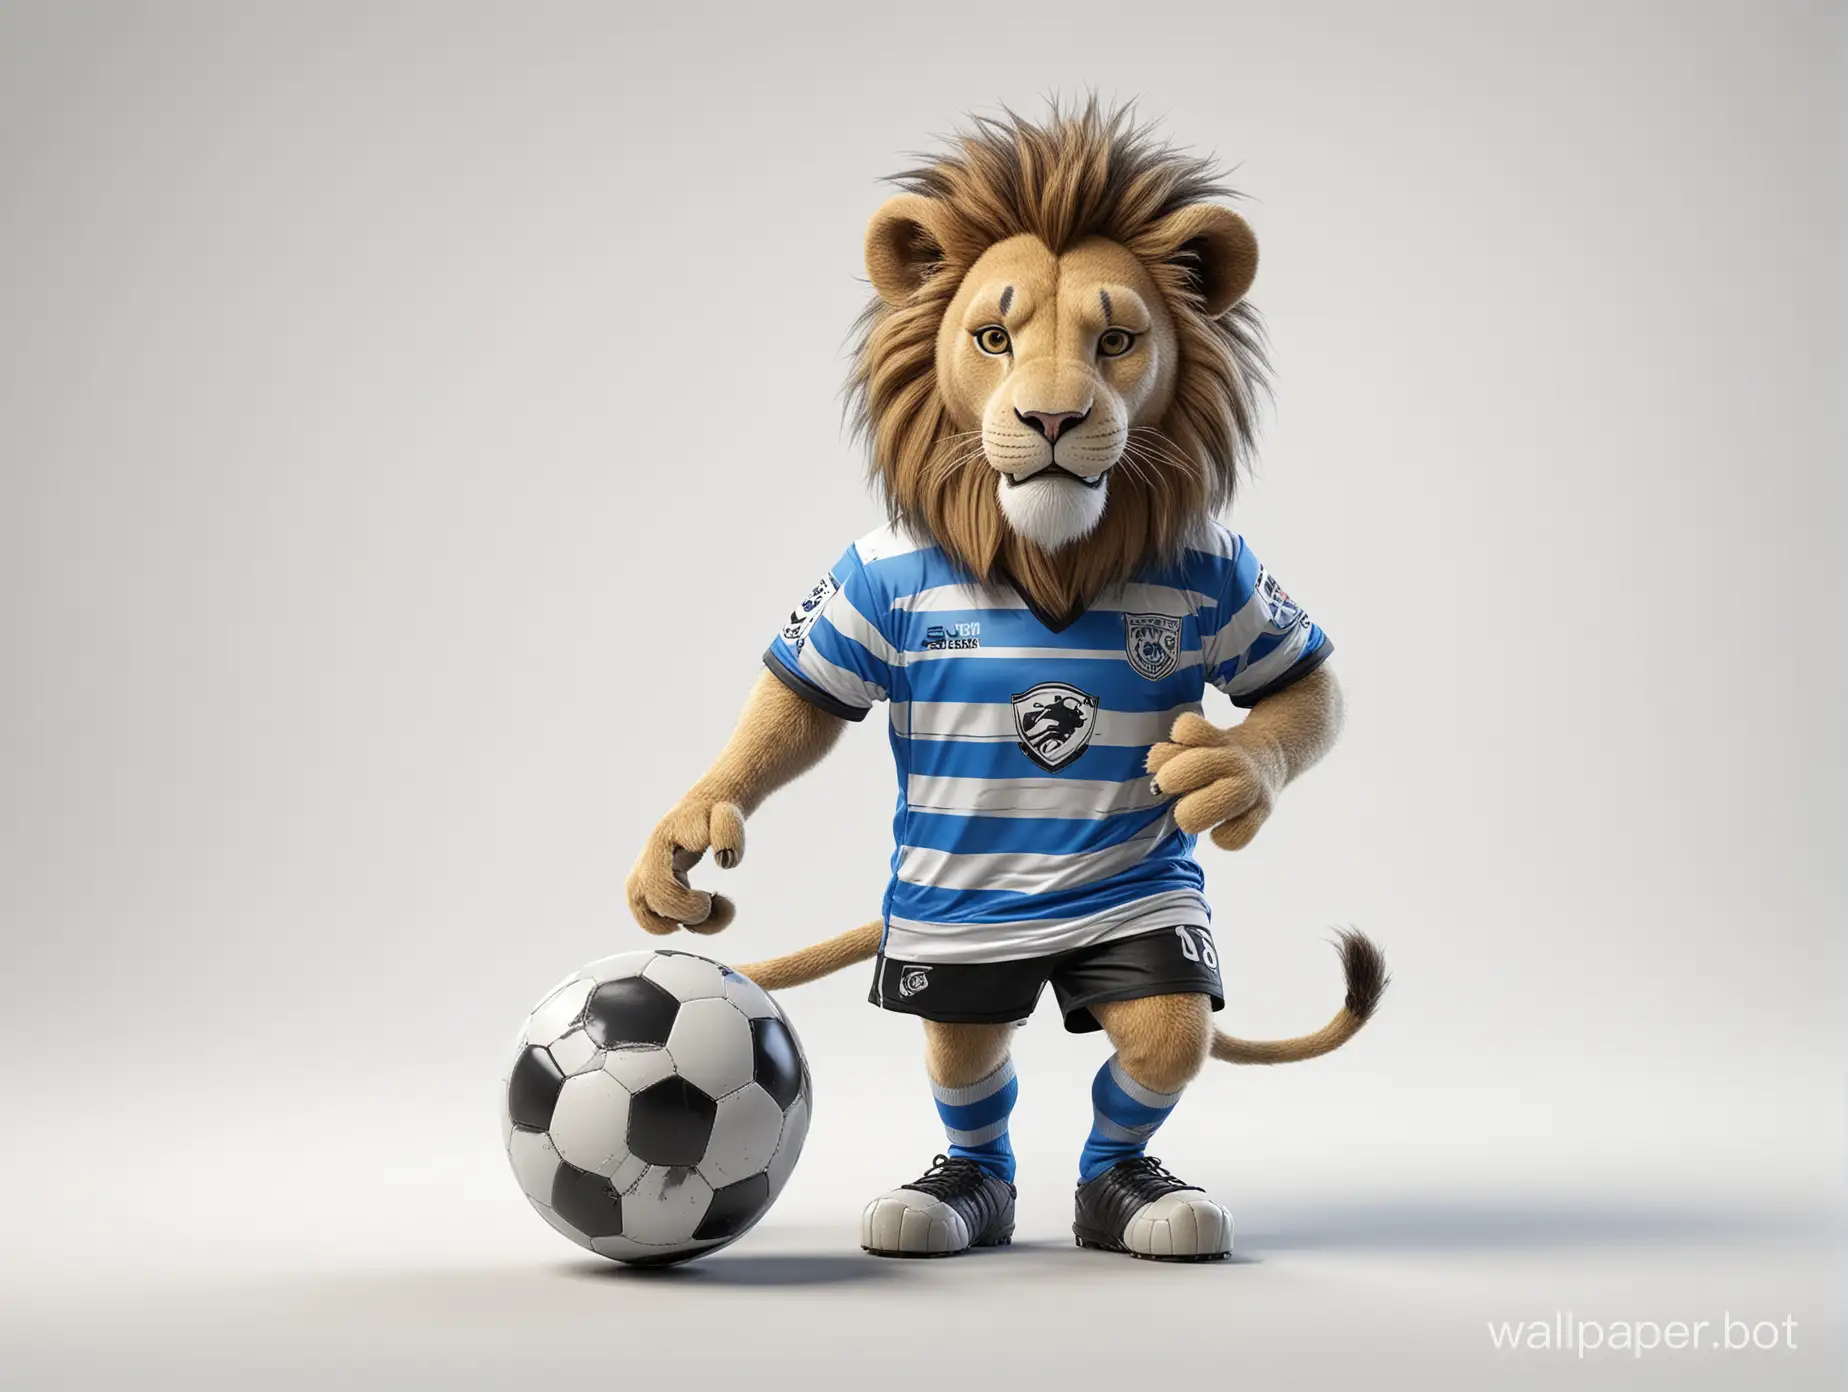 Lion-Mascot-Soccer-Team-in-Vibrant-Blue-and-White-with-Bold-Black-Stripes-Juggling-Ball-on-White-Background